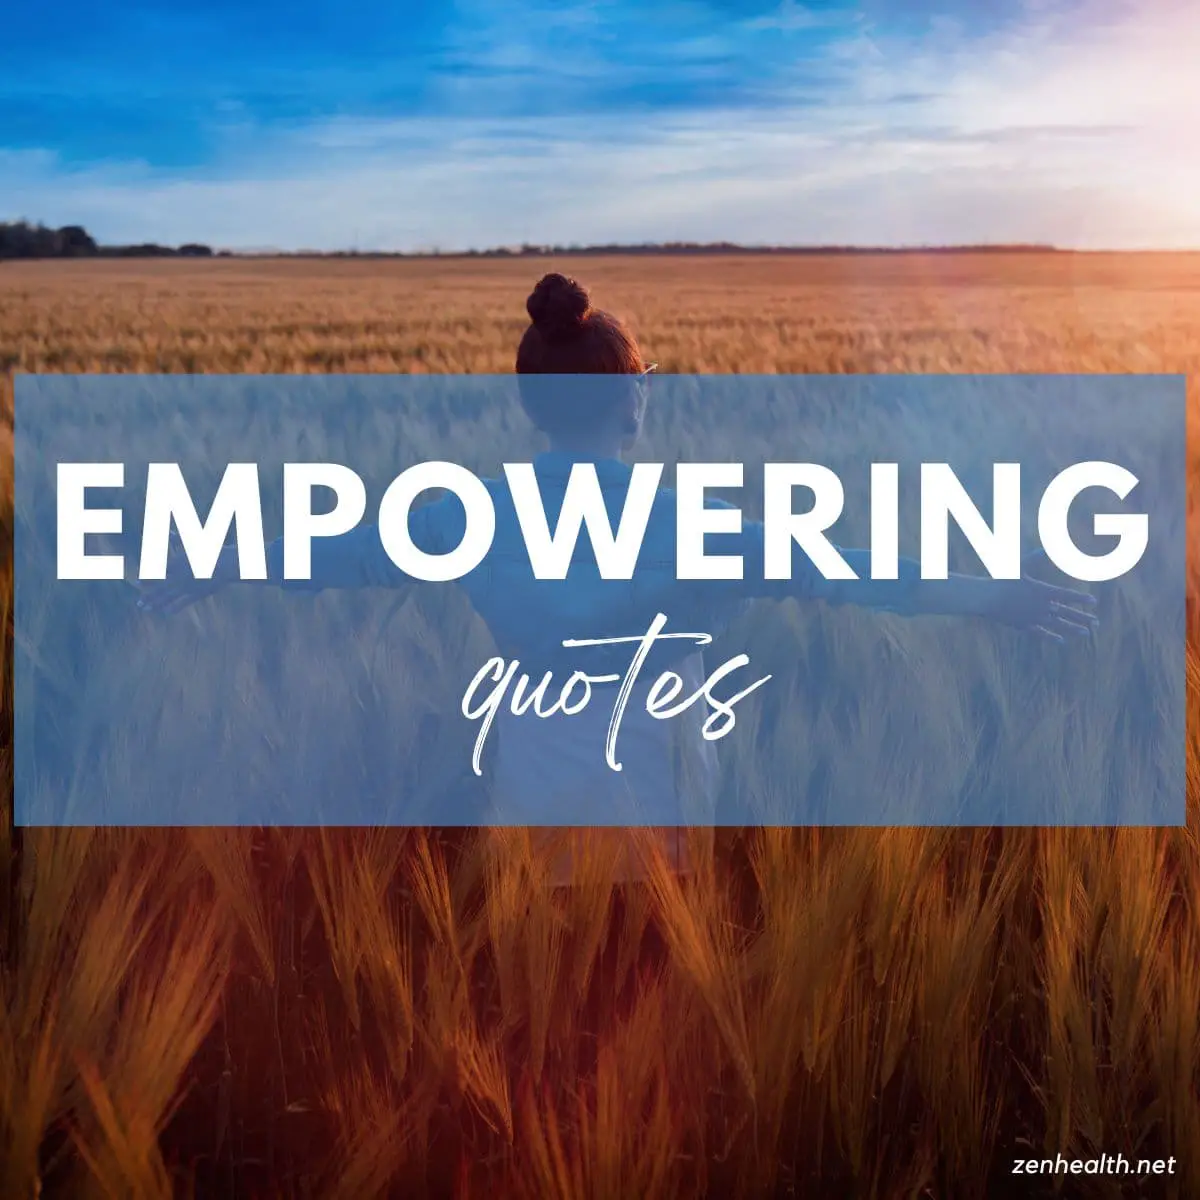 25 Short Empowering Quotes to Inspire You